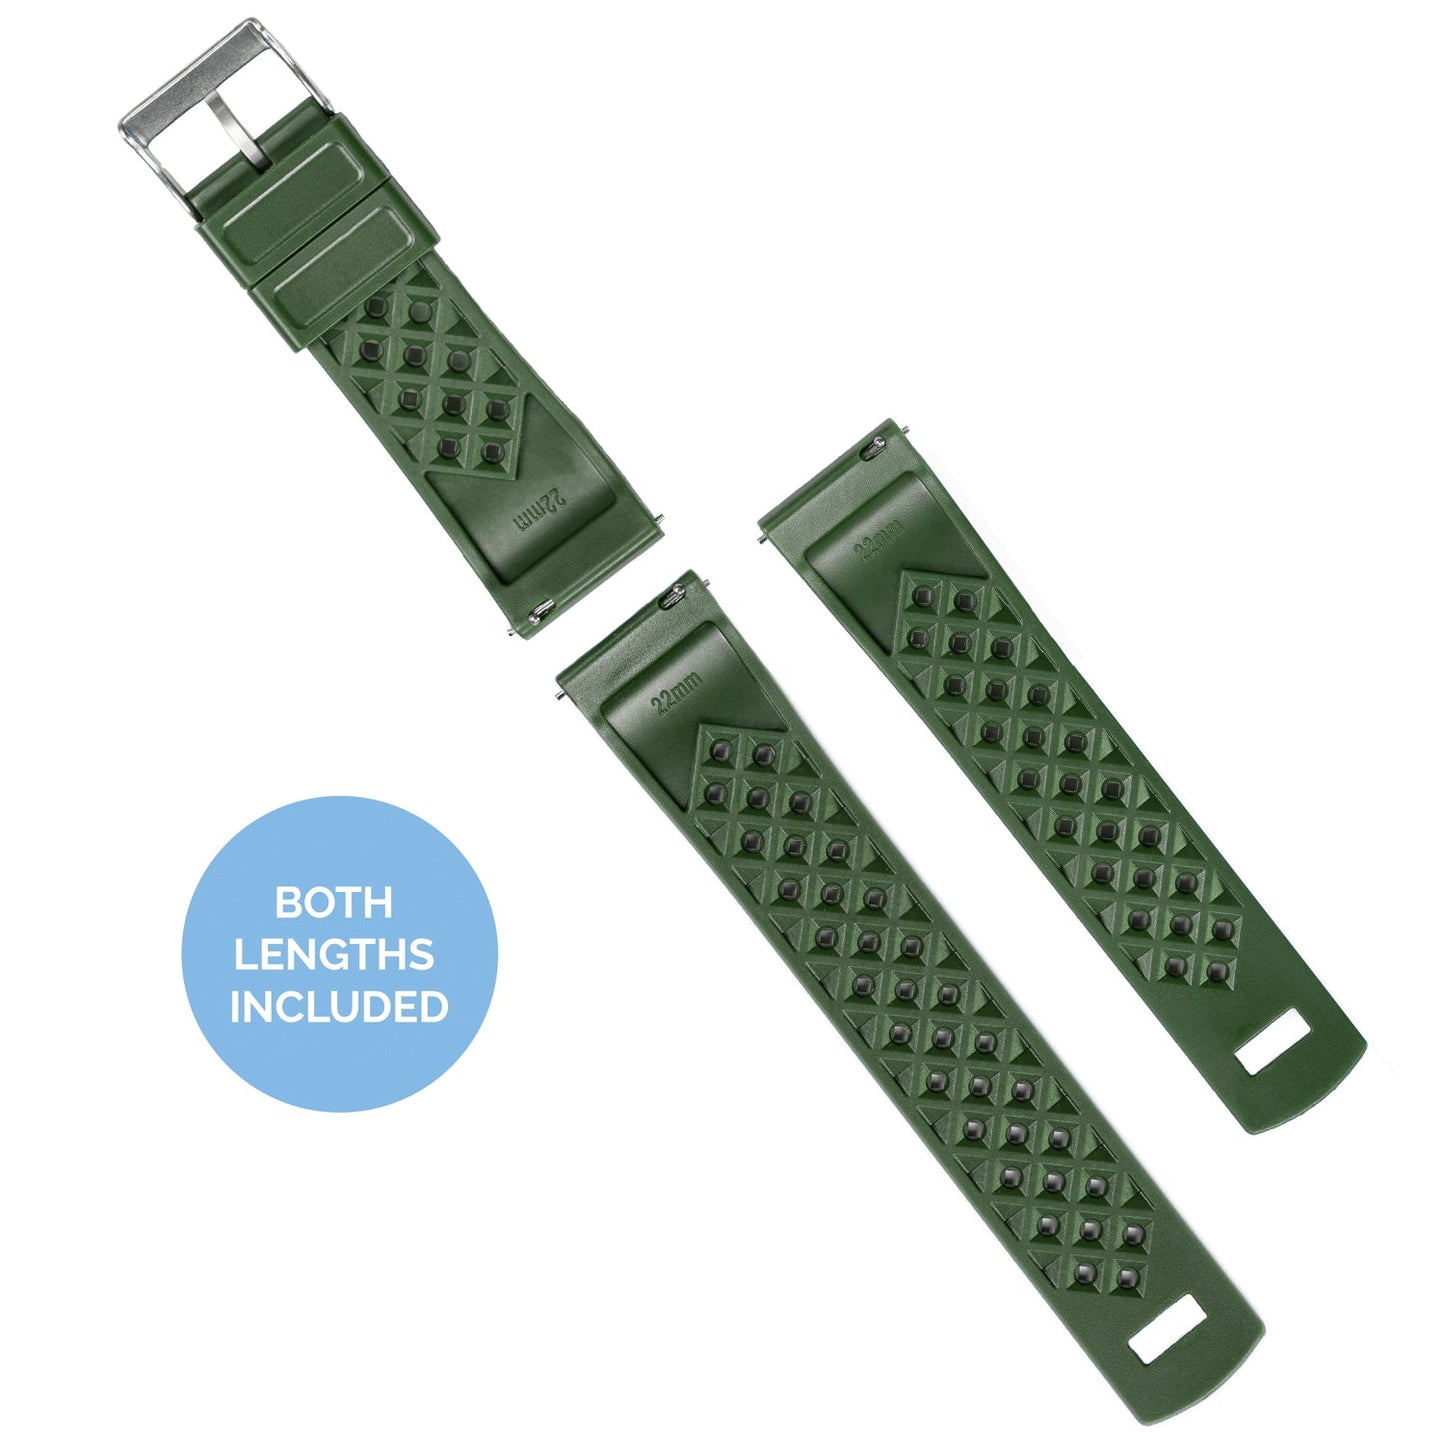 MOONSWATCH Bip | Tropical-Style | Army Green - Barton Watch Bands